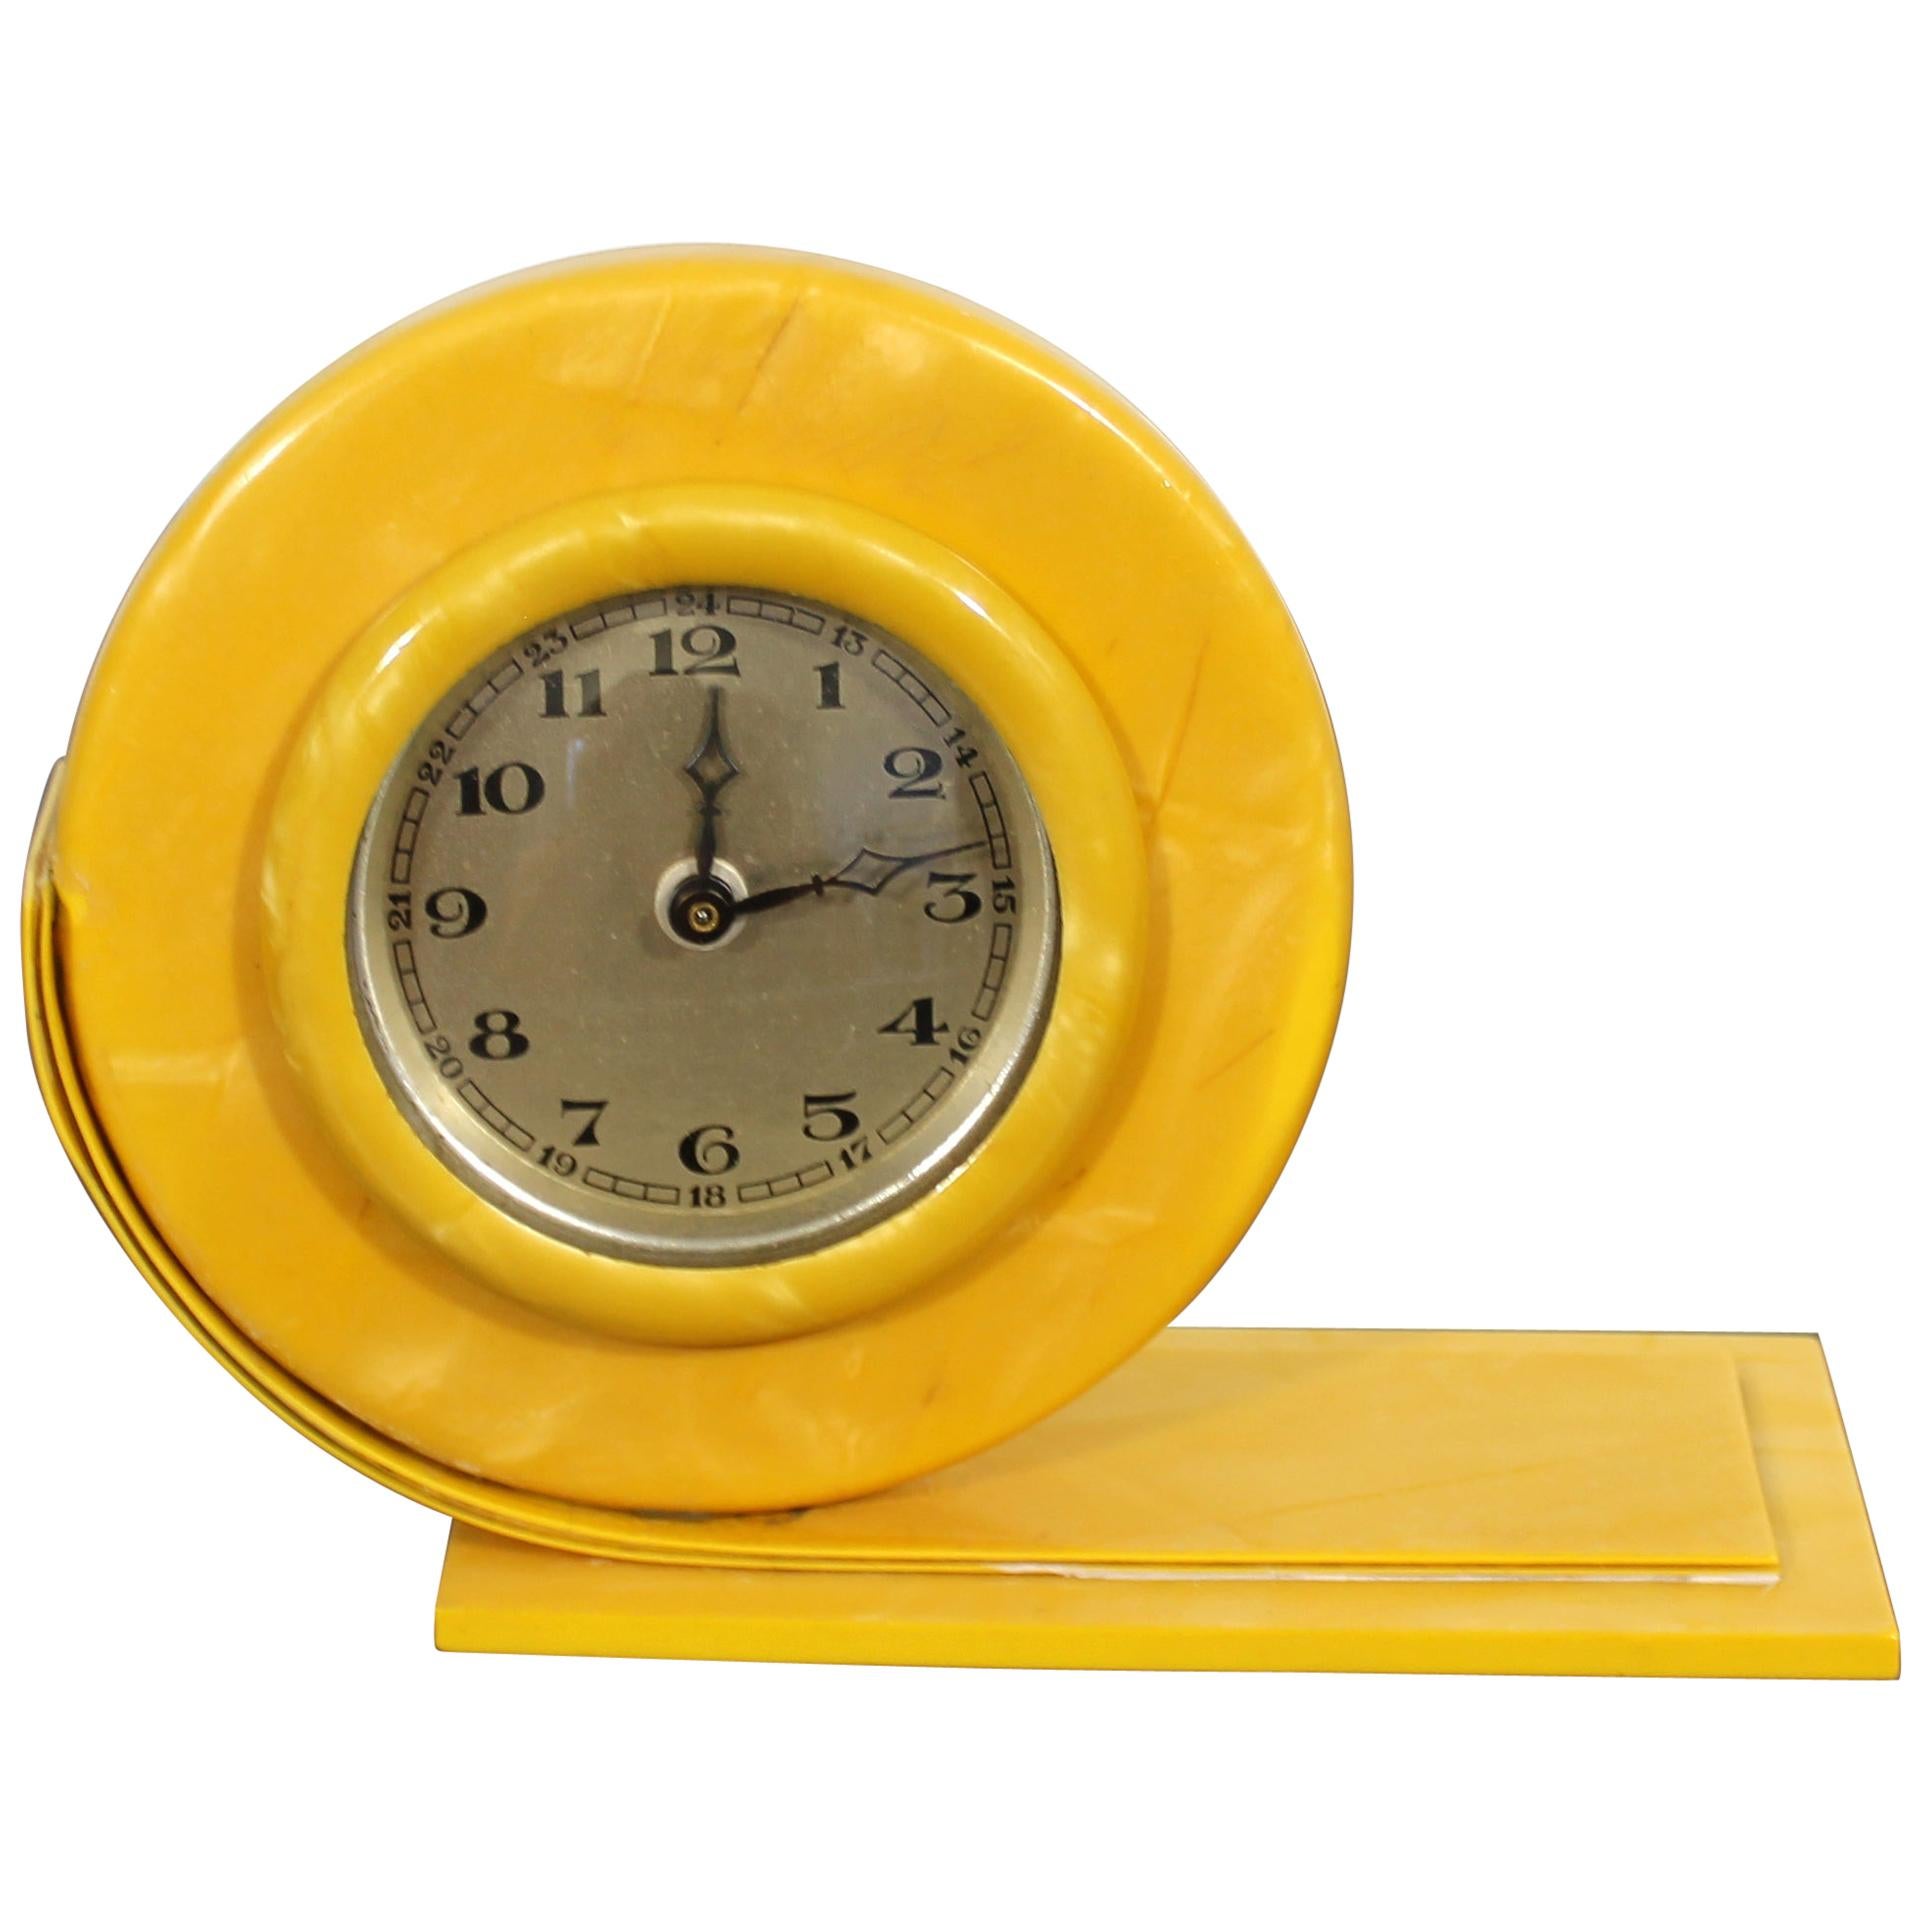 Art Deco Bright Yellow Celluloid Mantle Shelf Clock with Round Face 1930s-1940s